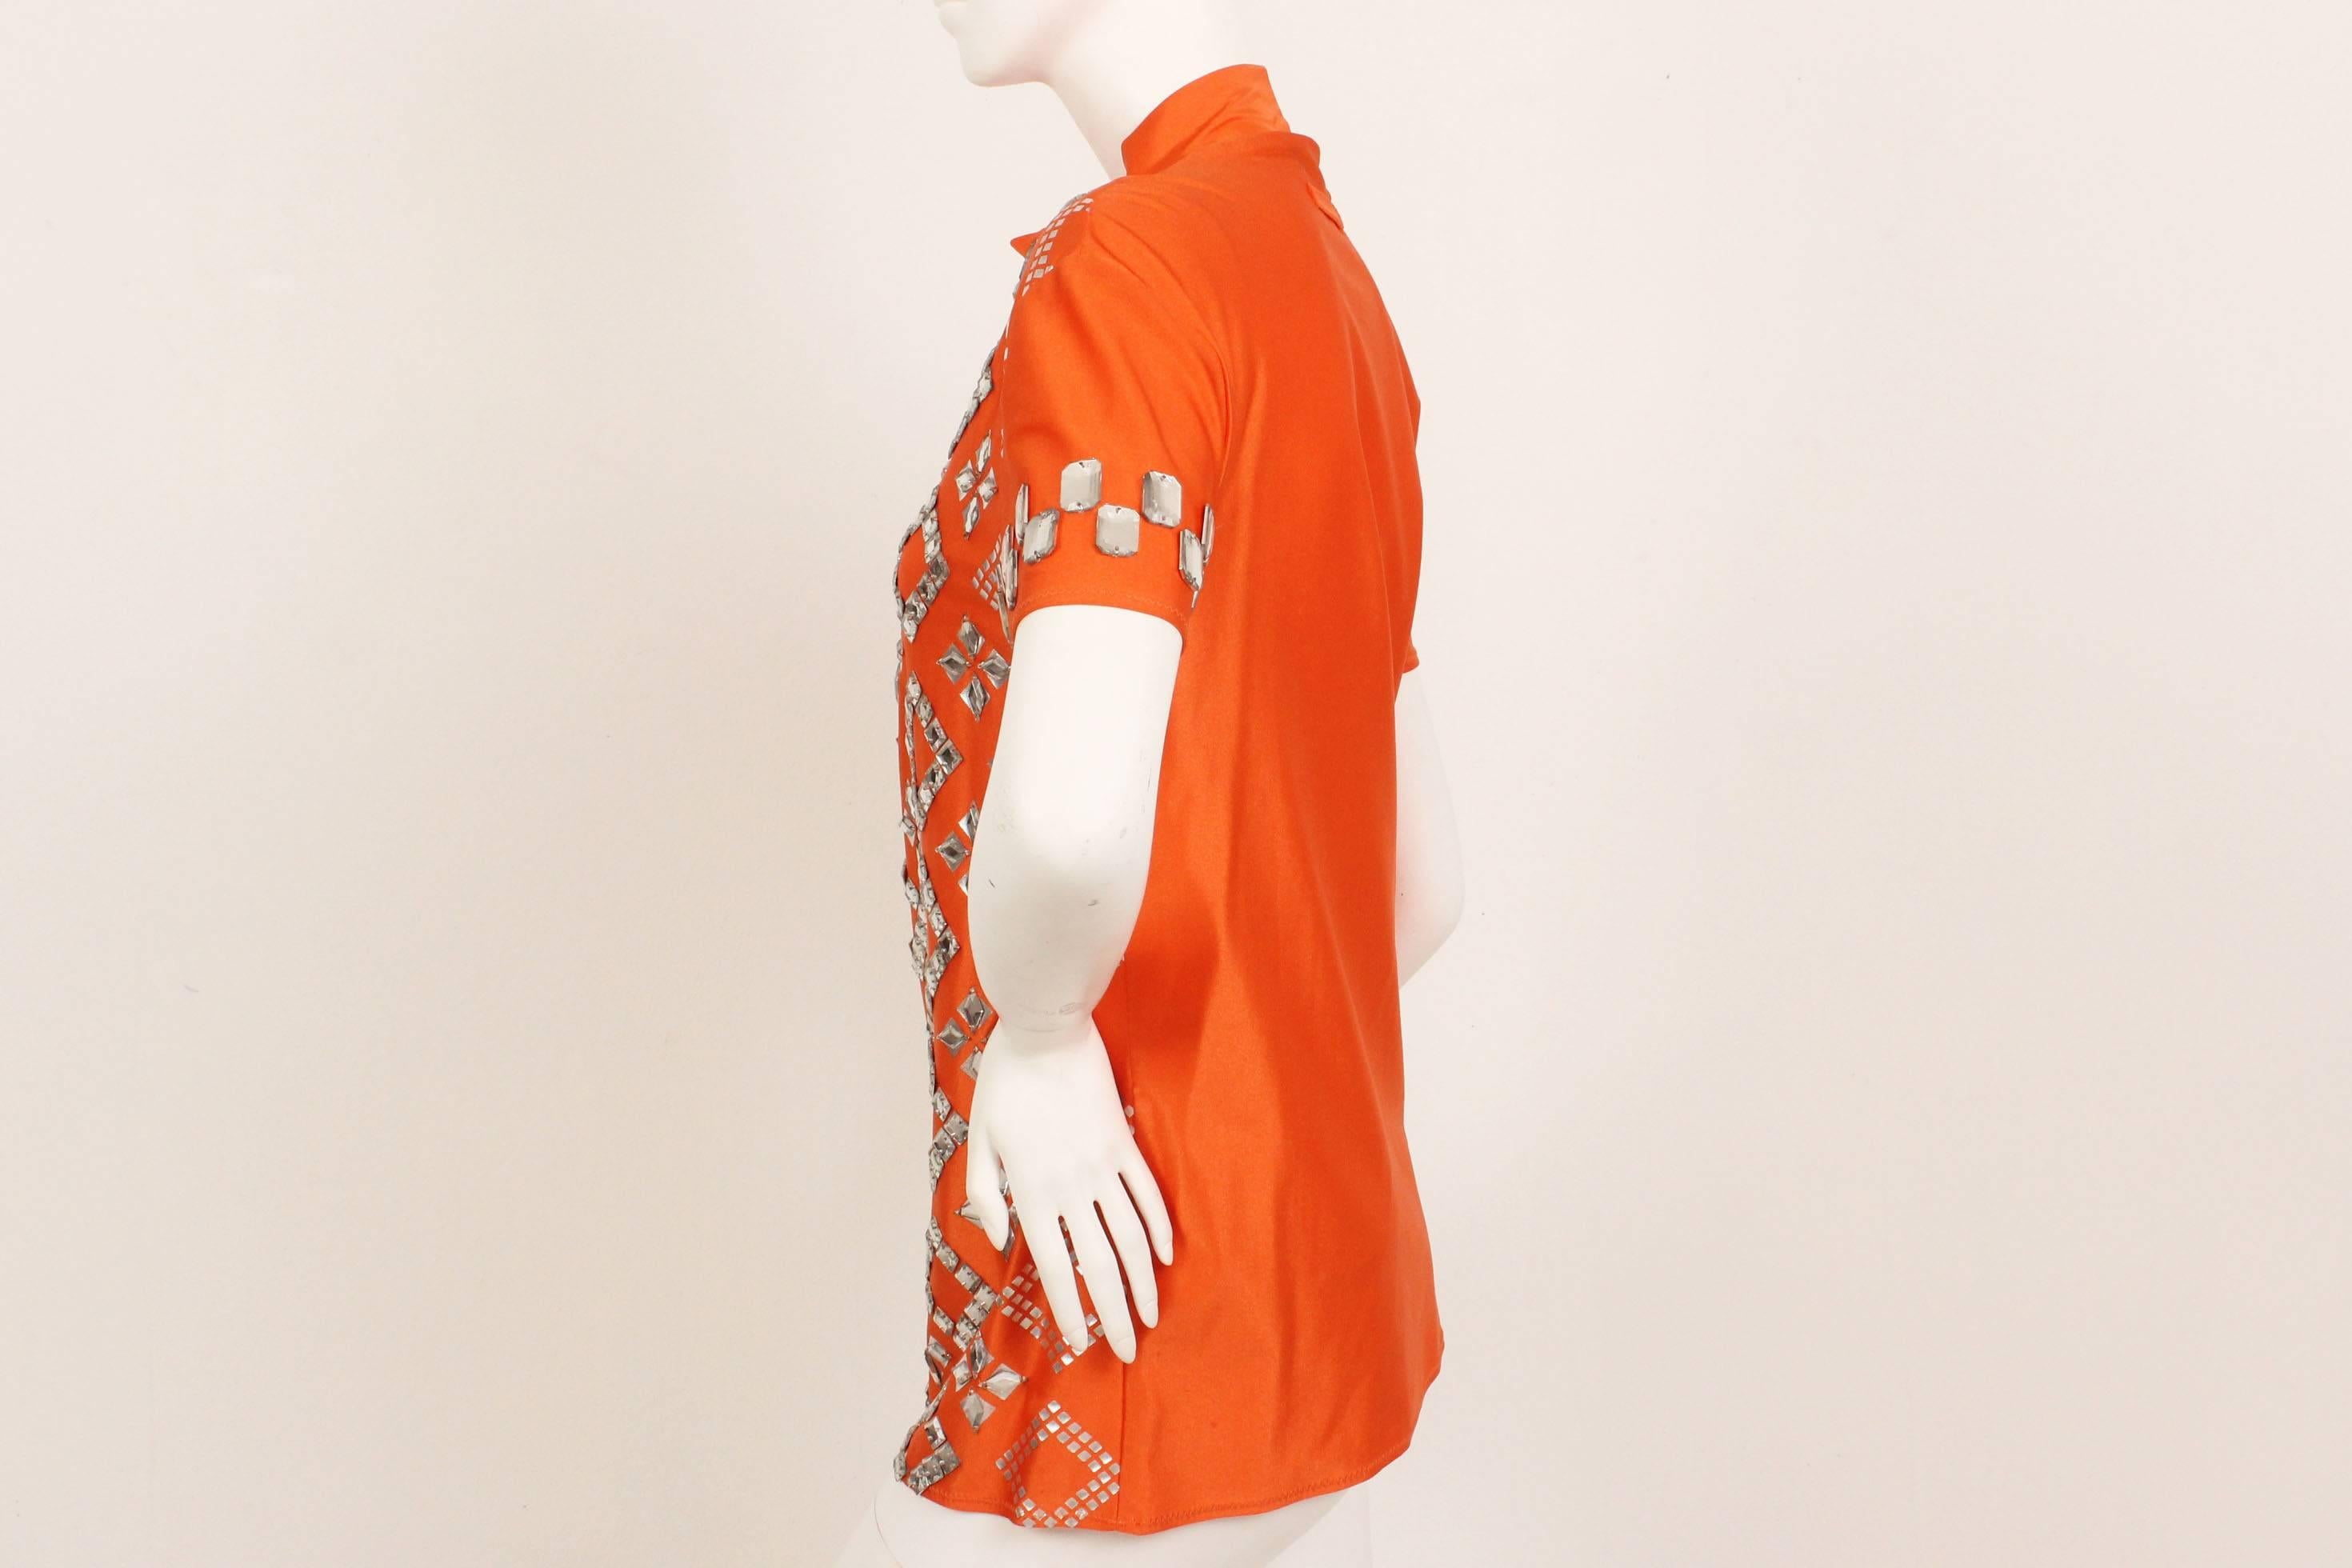 This Jean Paul Gaultier pour Equator piece is all about sporty glamour. The vibrant tangerine orange color of this short sleeve mock neck is shimmery and playful. Plexi mirrored gems adorn the front with metallic silver grids in geometric shapes and